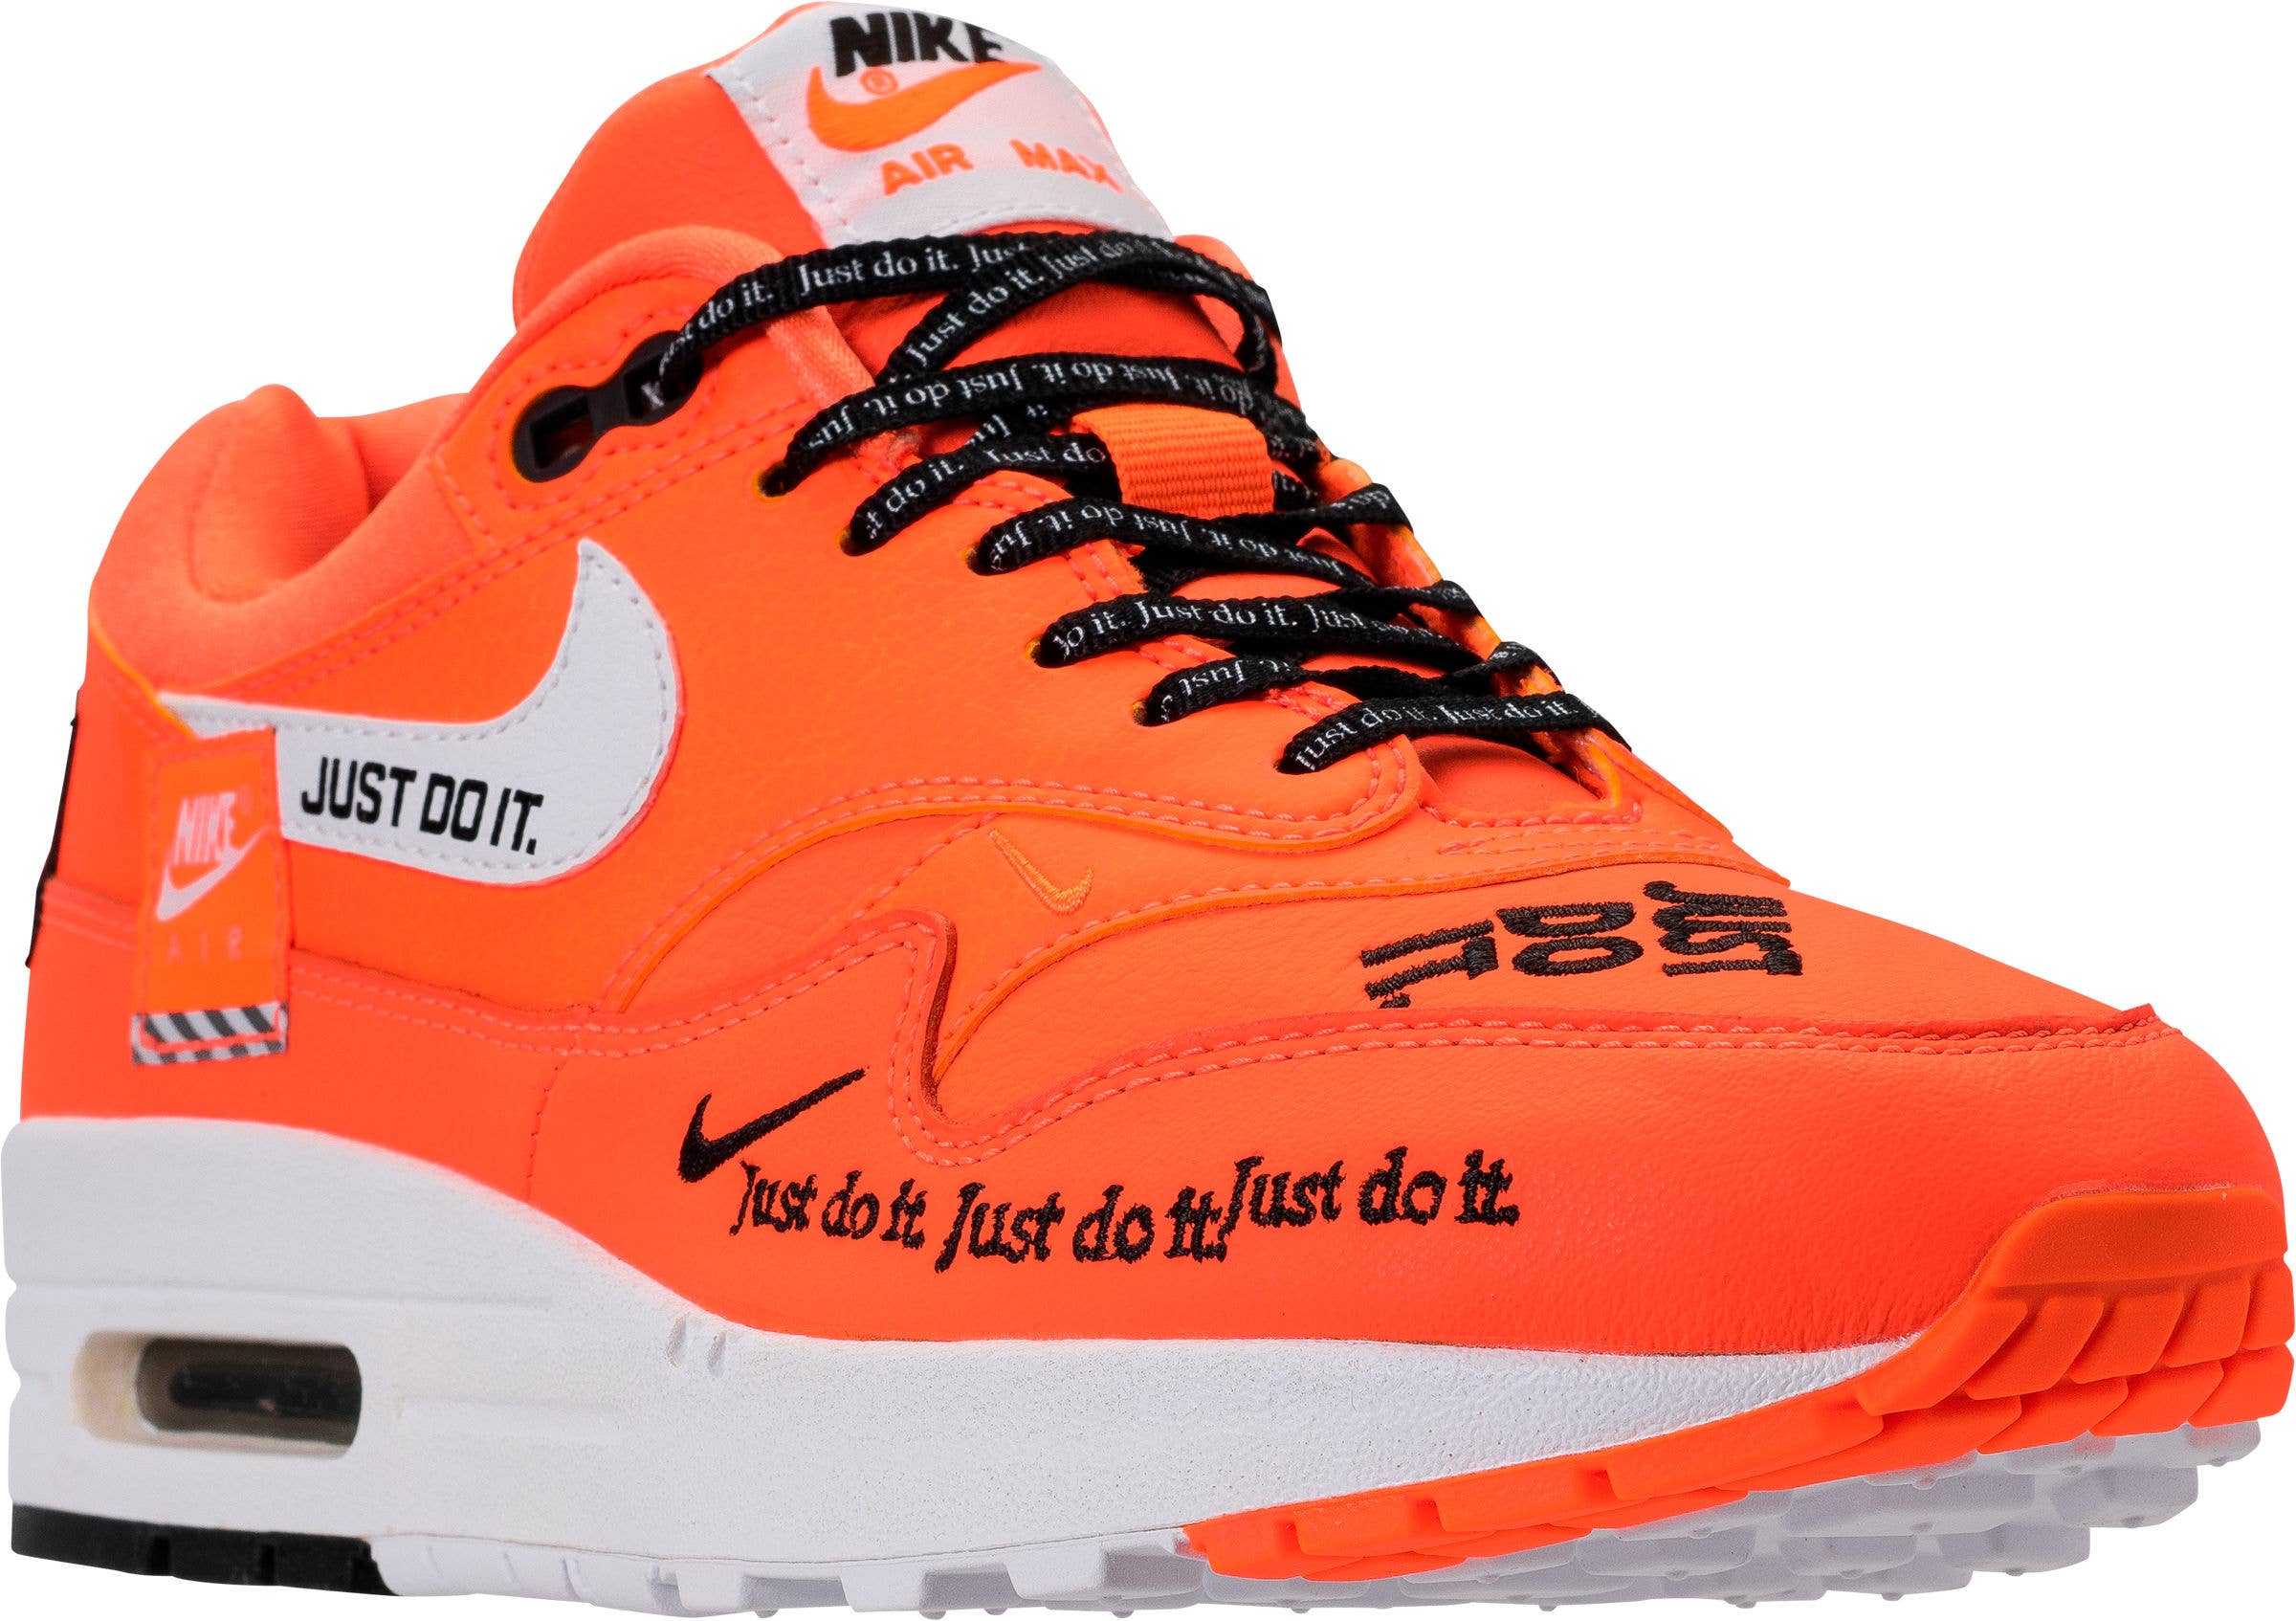 Scully Consciente Foto Another 'Just Do It' Nike Air Max 1 Surfaces | Complex